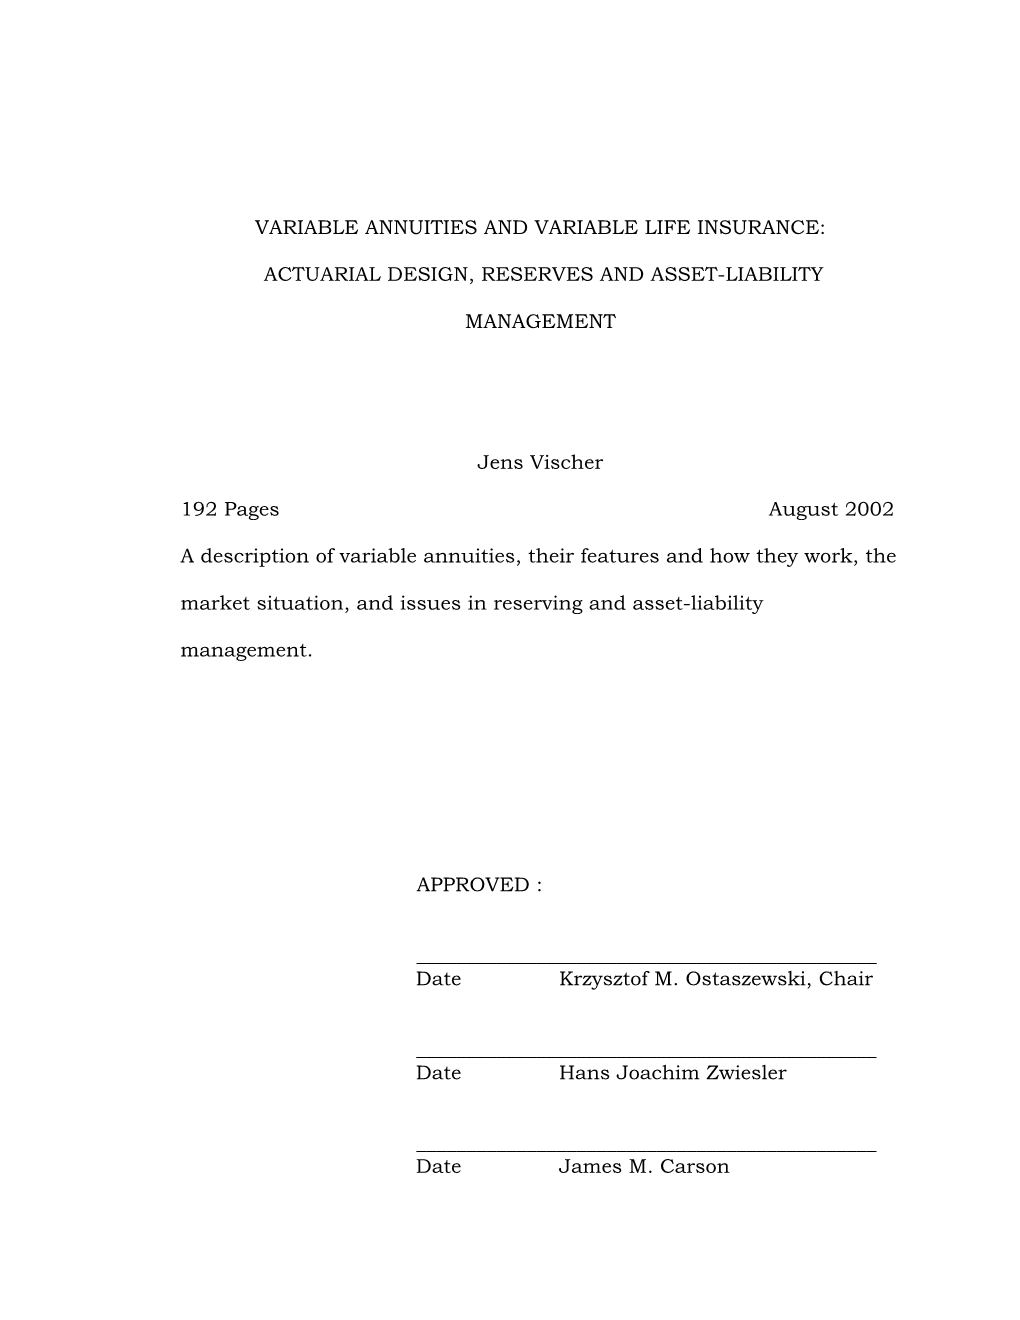 VARIABLE ANNUITIES and VARIABLE LIFE INSURANCE: ACTUARIAL DESIGN, RESERVES and ASSET-LIABILITY MANAGEMENT Jens Vischer 192 Pages